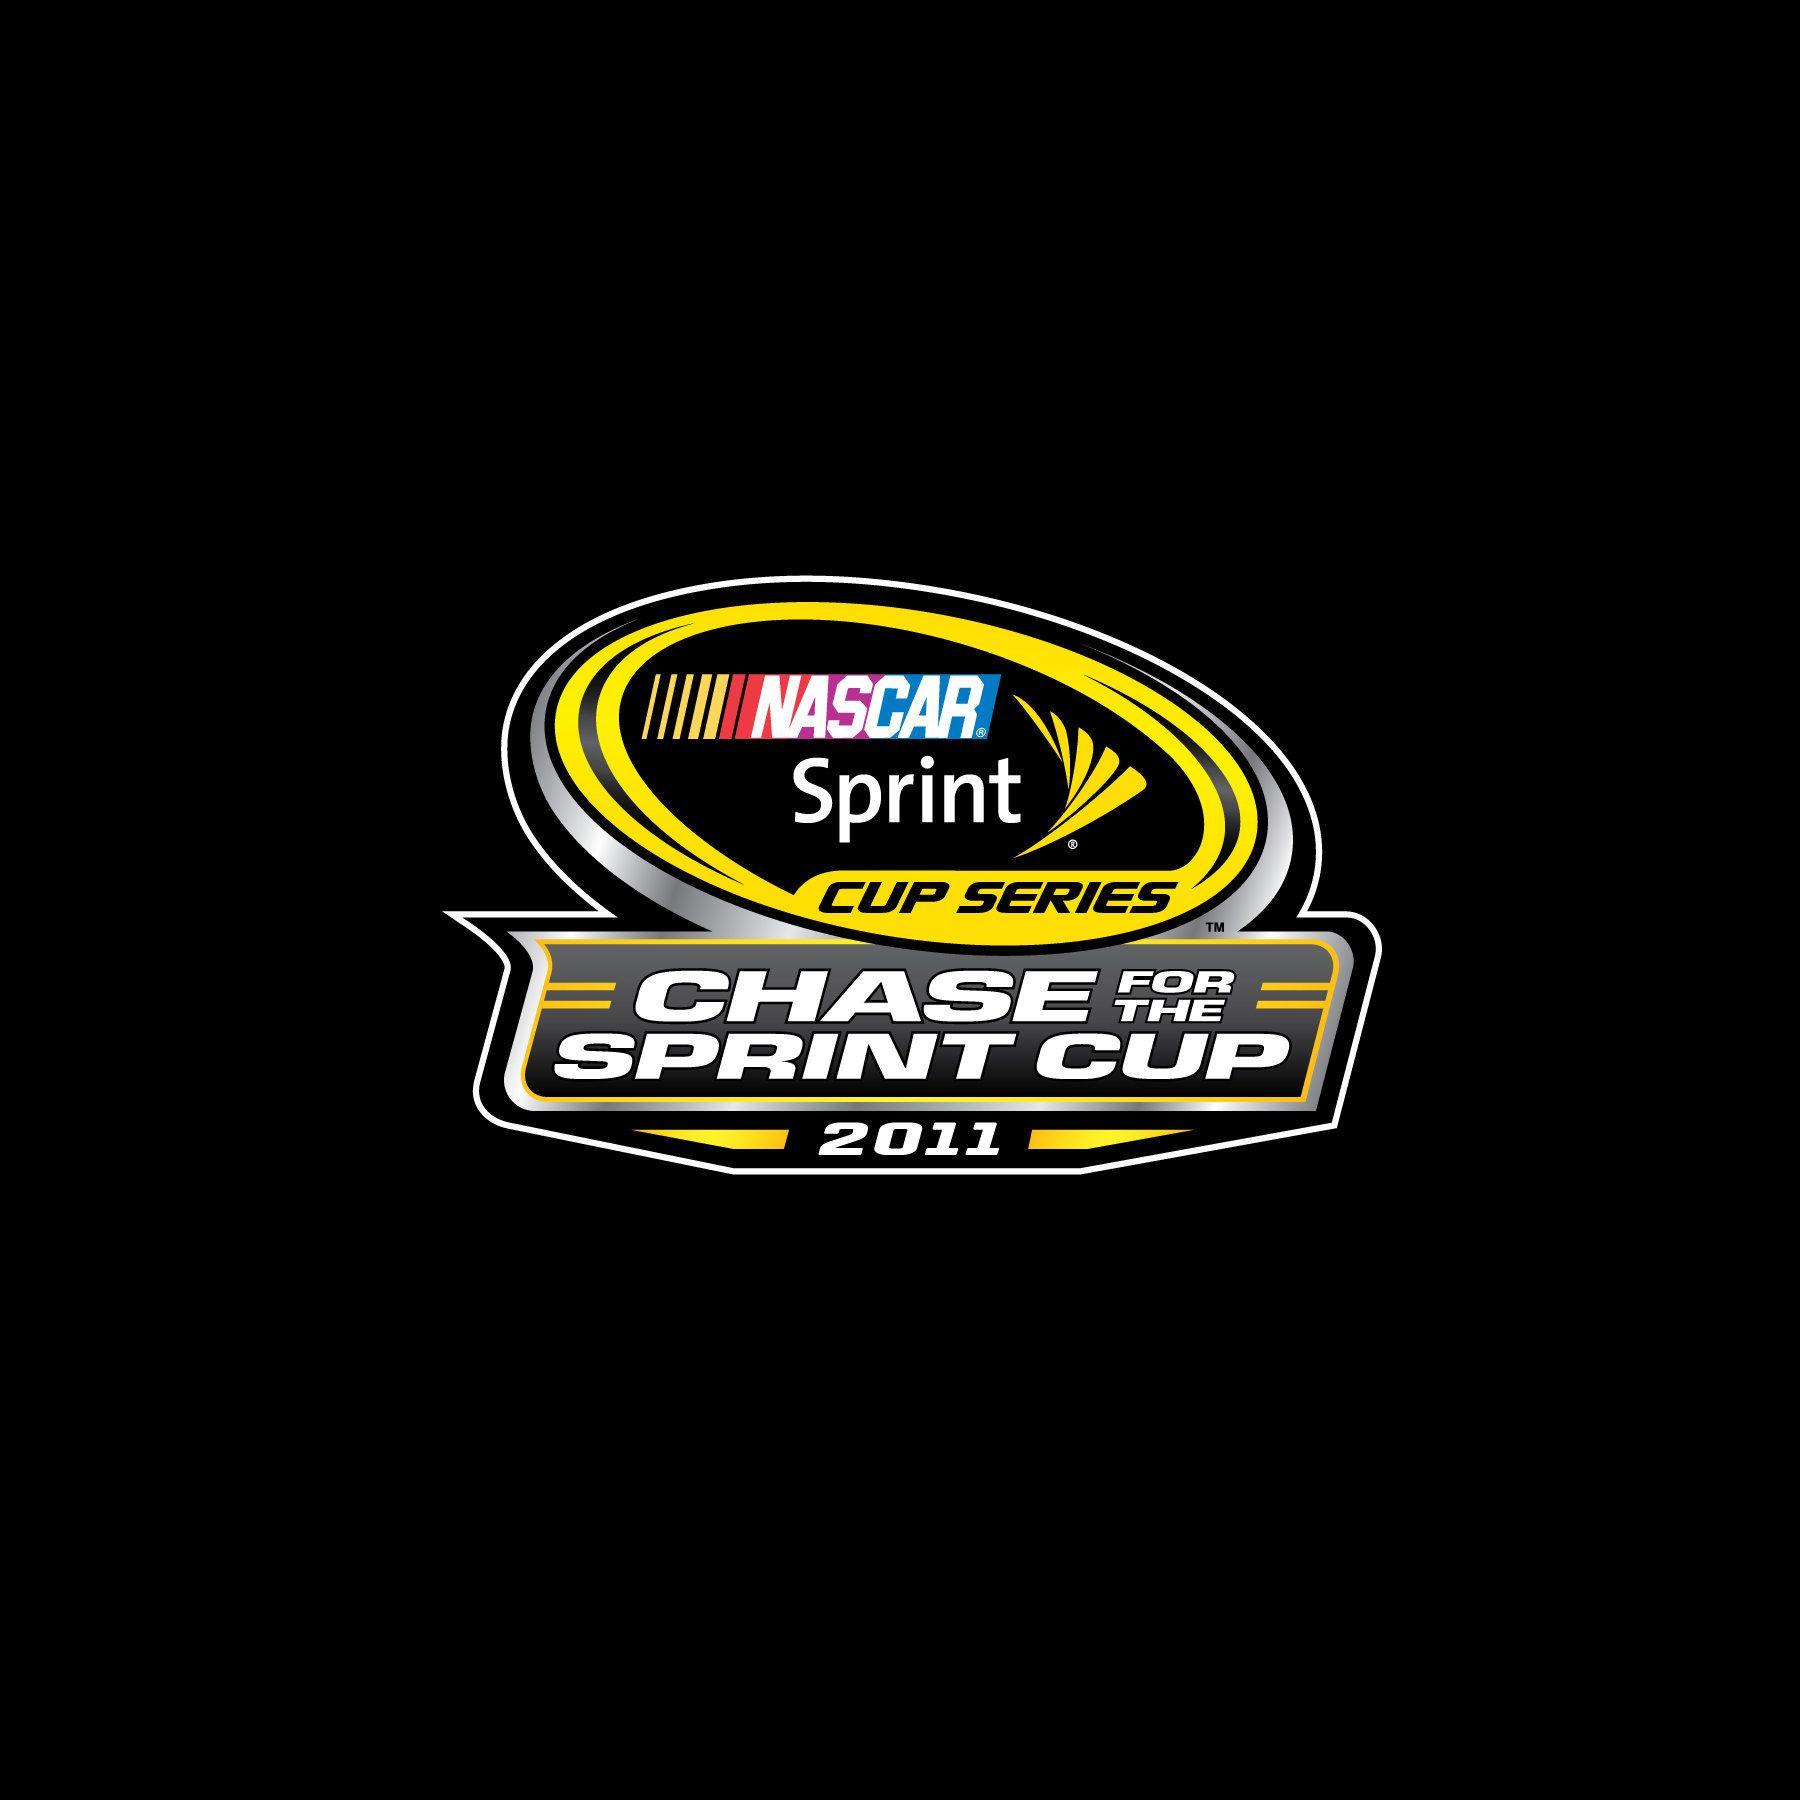 NASCAR Sprint Cup Logo - NASCAR Chase for the Sprint Cup comes down to 14 drivers competing ...